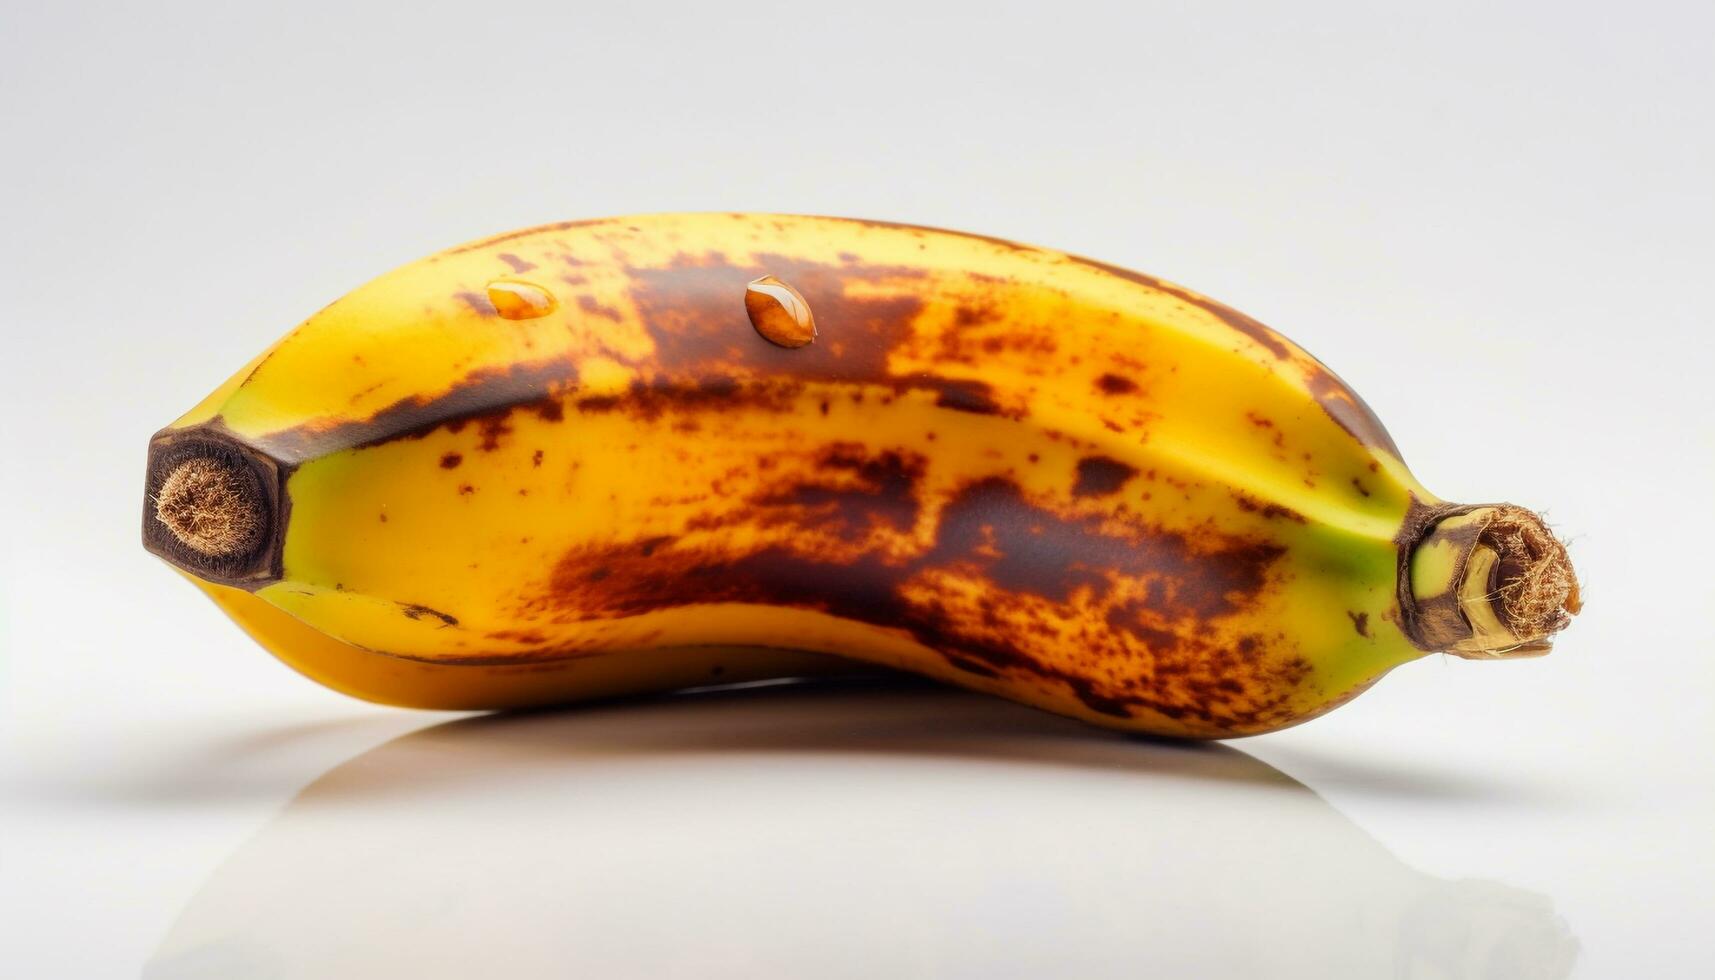 Juicy yellow banana, a healthy snack for a tropical summer generated by AI photo